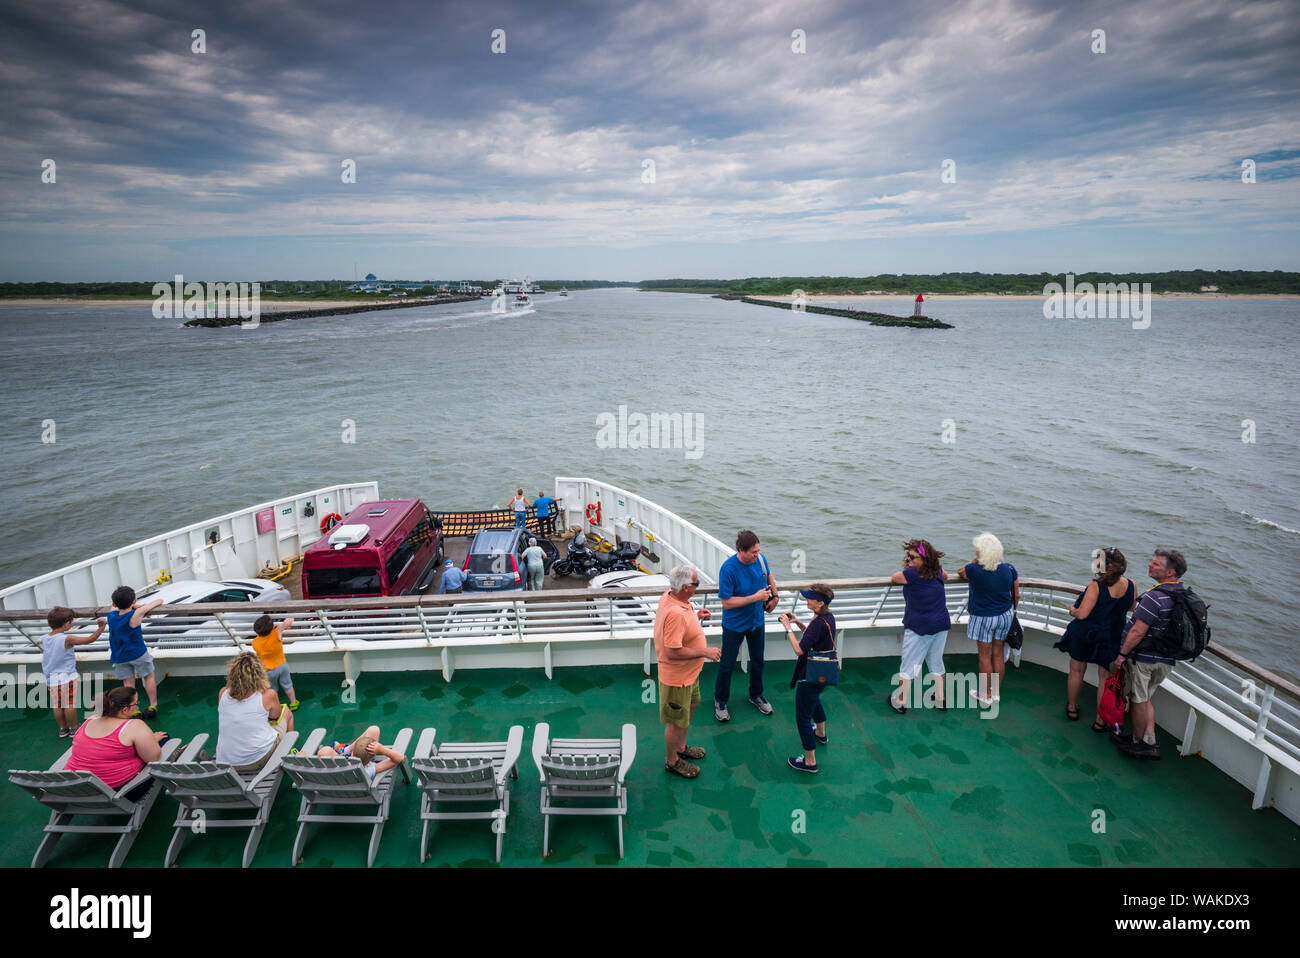 USA, New Jersey, Cape May. an Bord der Cape May, NJ, Lewes, Delaware Fähre Stockfoto